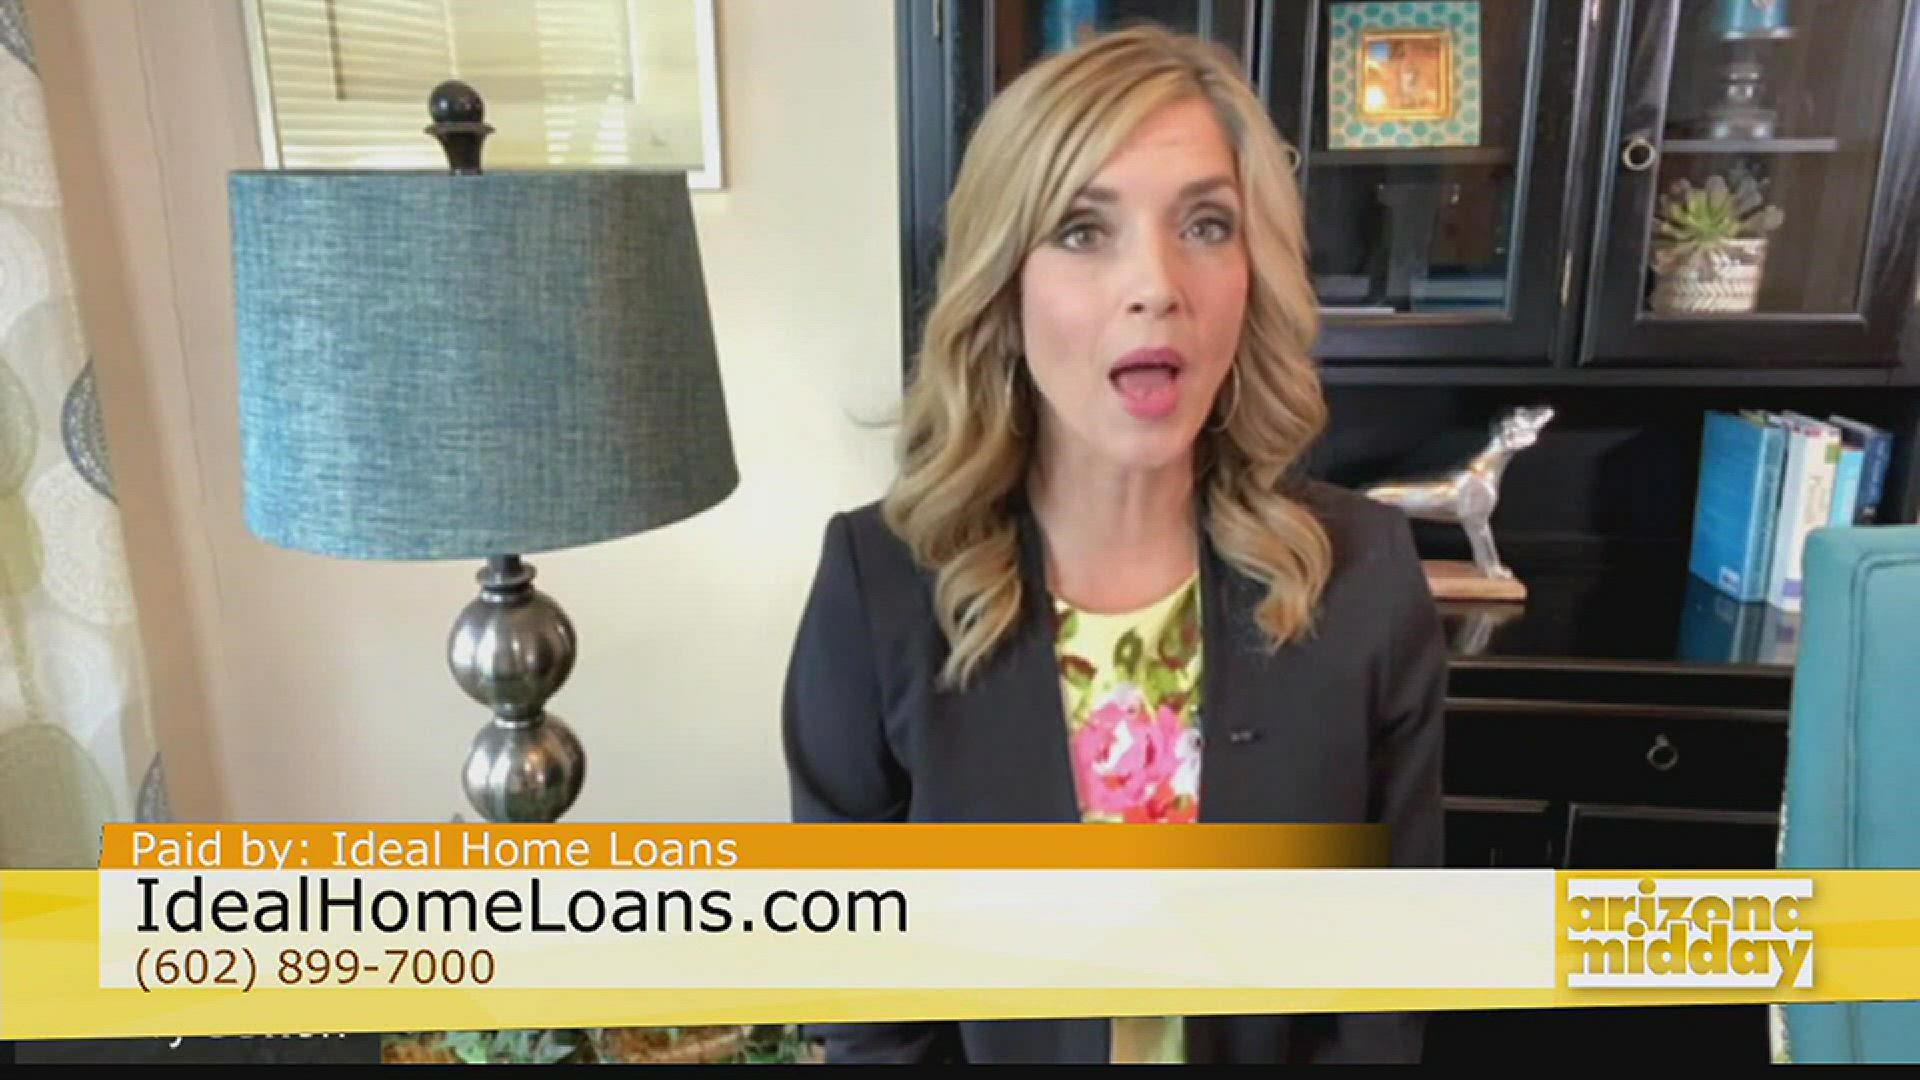 Brent Ivinson with Ideal Home Loans explains how current low interest rates in home mortgages can help put money back in your pocket.